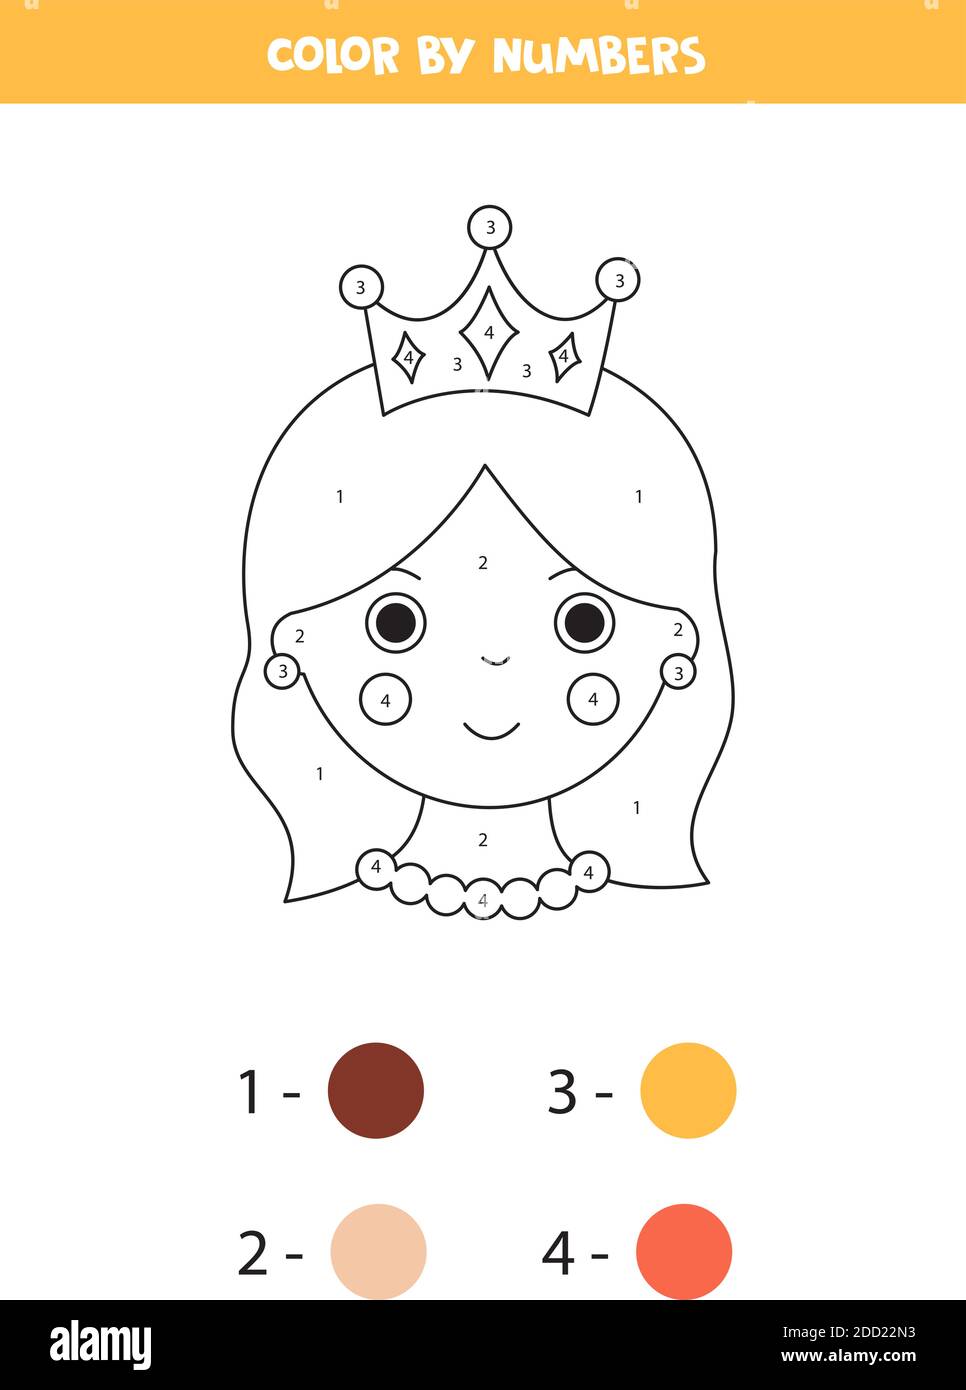 Coloring page with cartoon queen by numbers. Educational math game for kids. Stock Vector